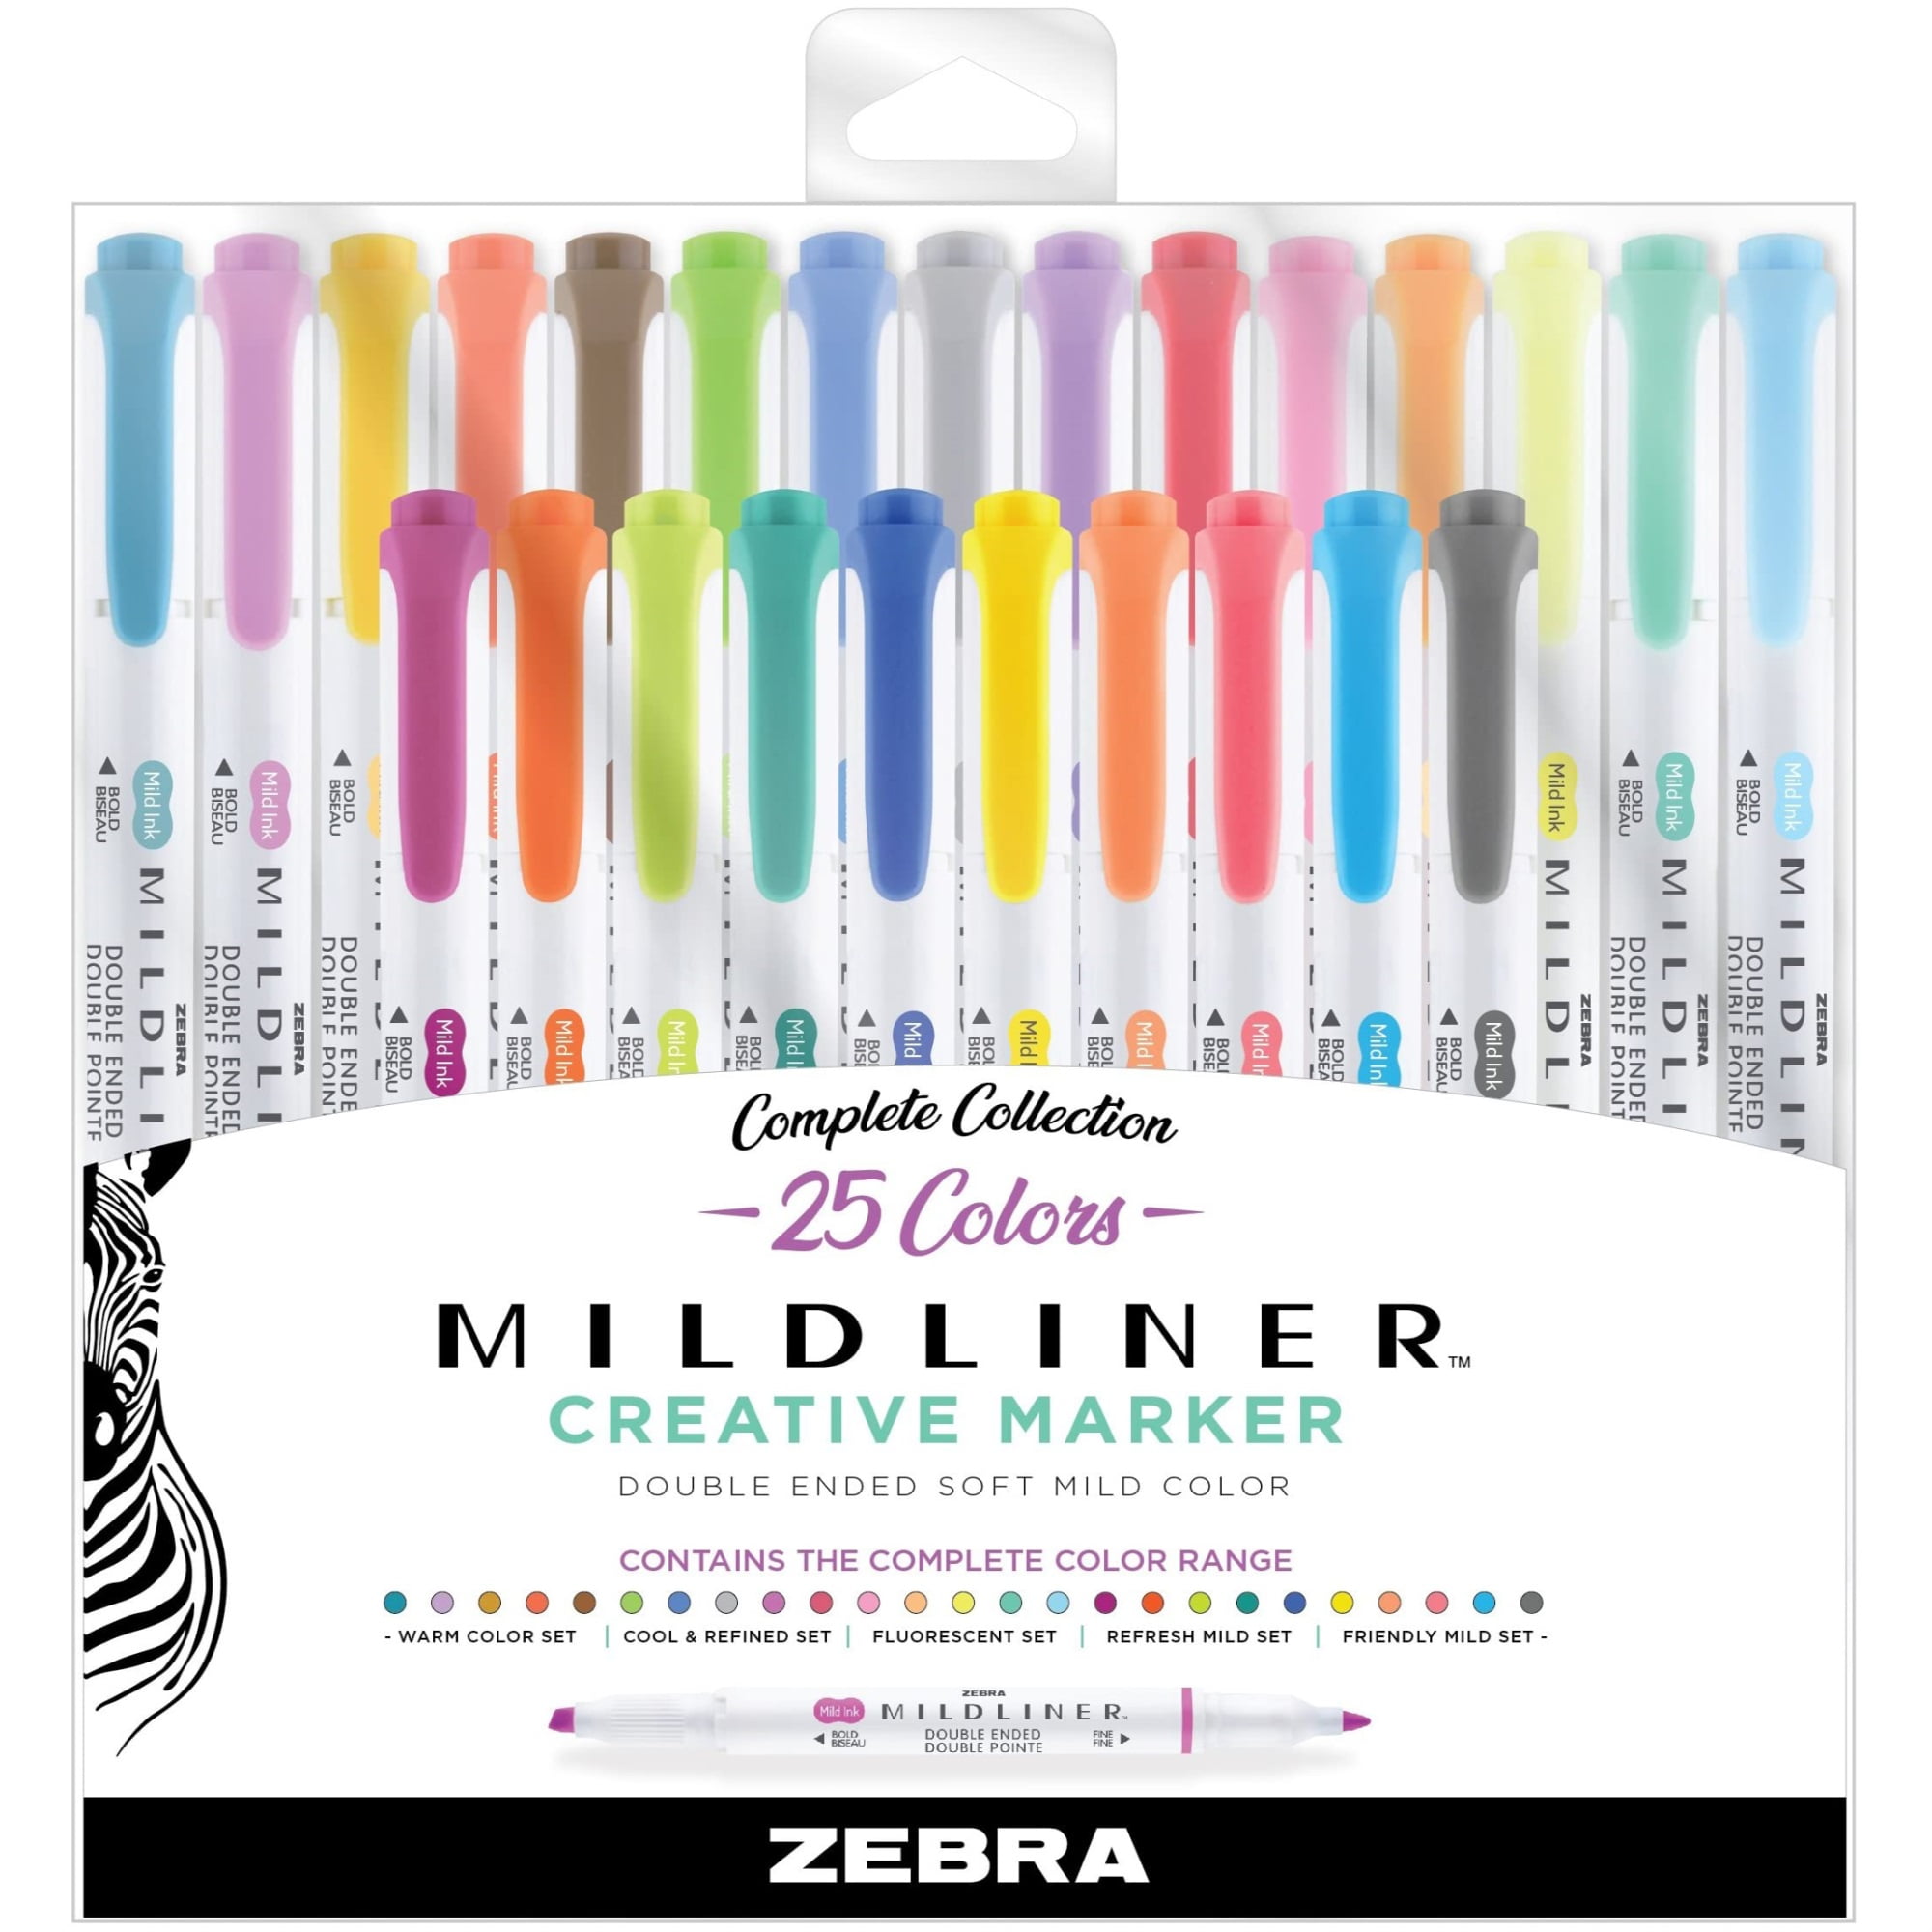 Midliner Double Ended Highlighter, Blue Green, 5 1/2 x 1/4 inches, Mardel